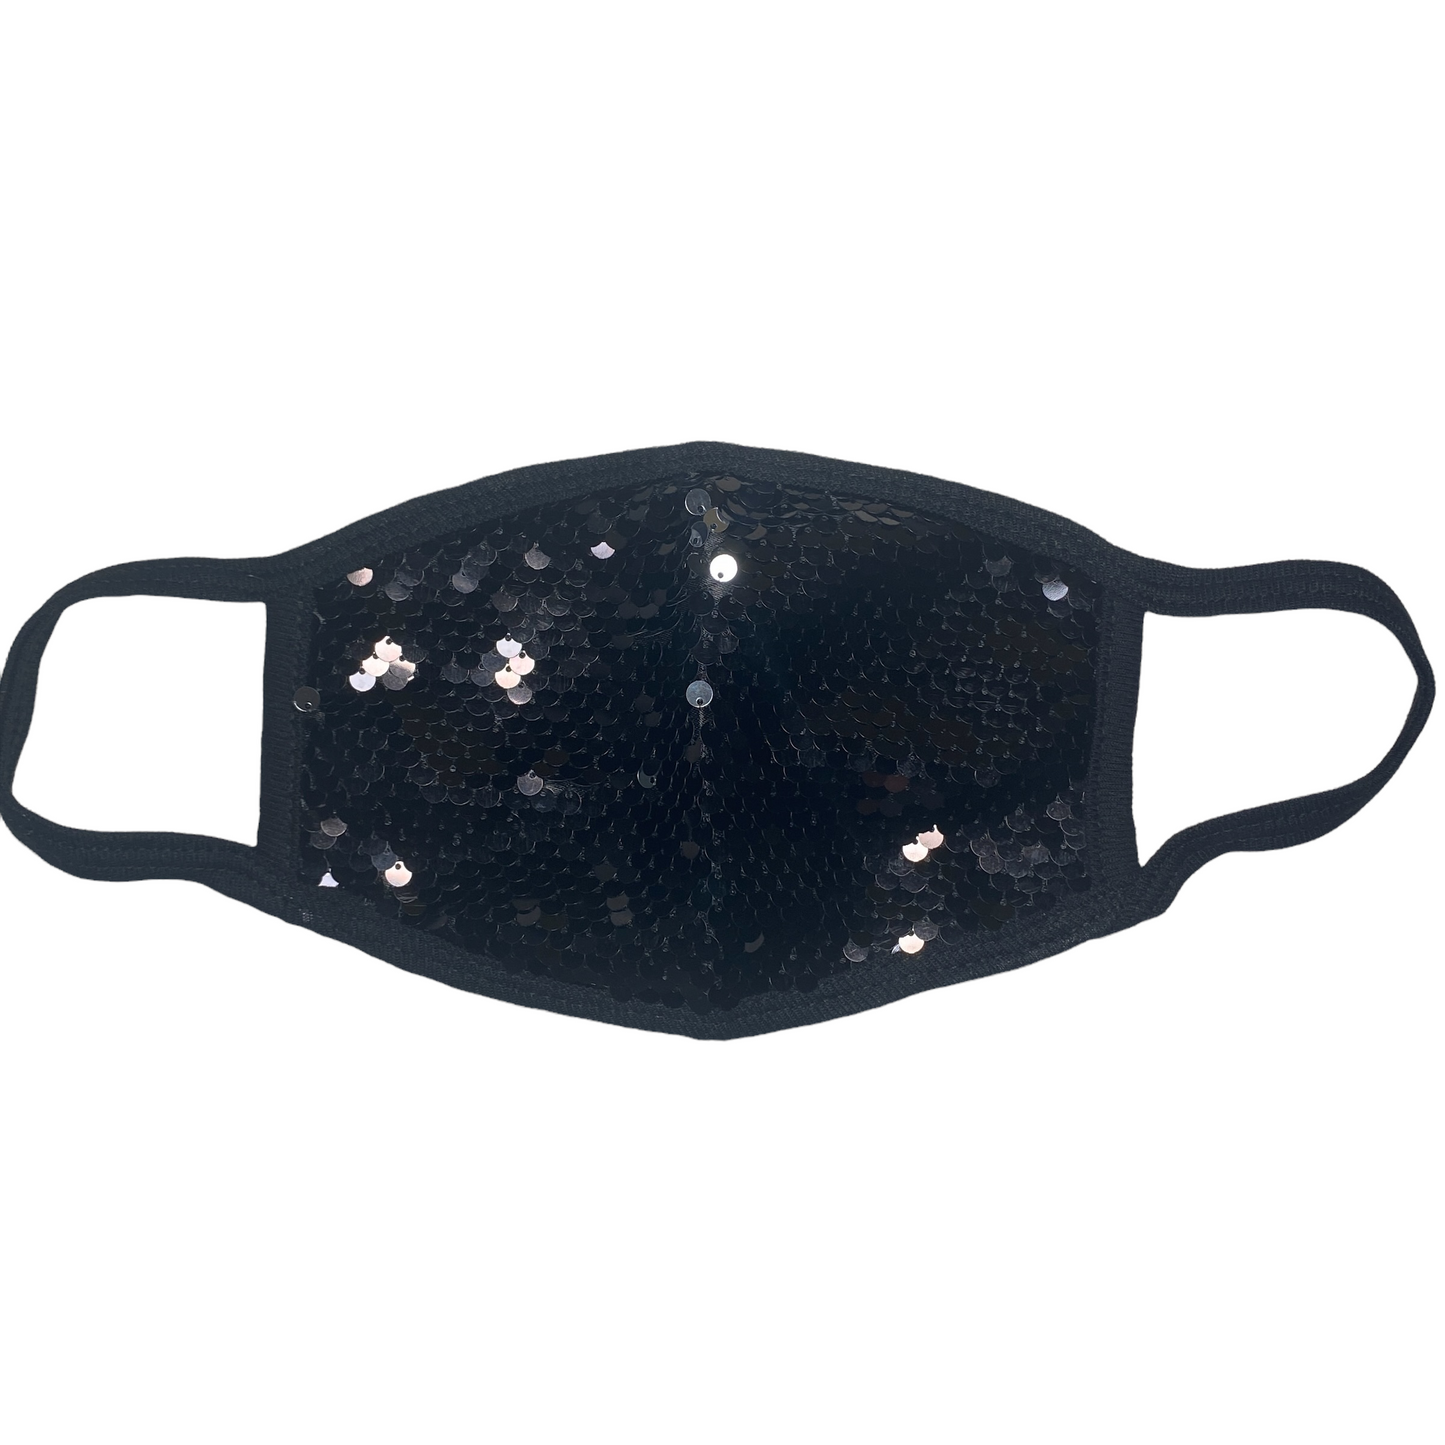 Adult Reusable Fabric Sequin Mask Mask SPIRIT SPARKPLUGS Small Black Sequins  